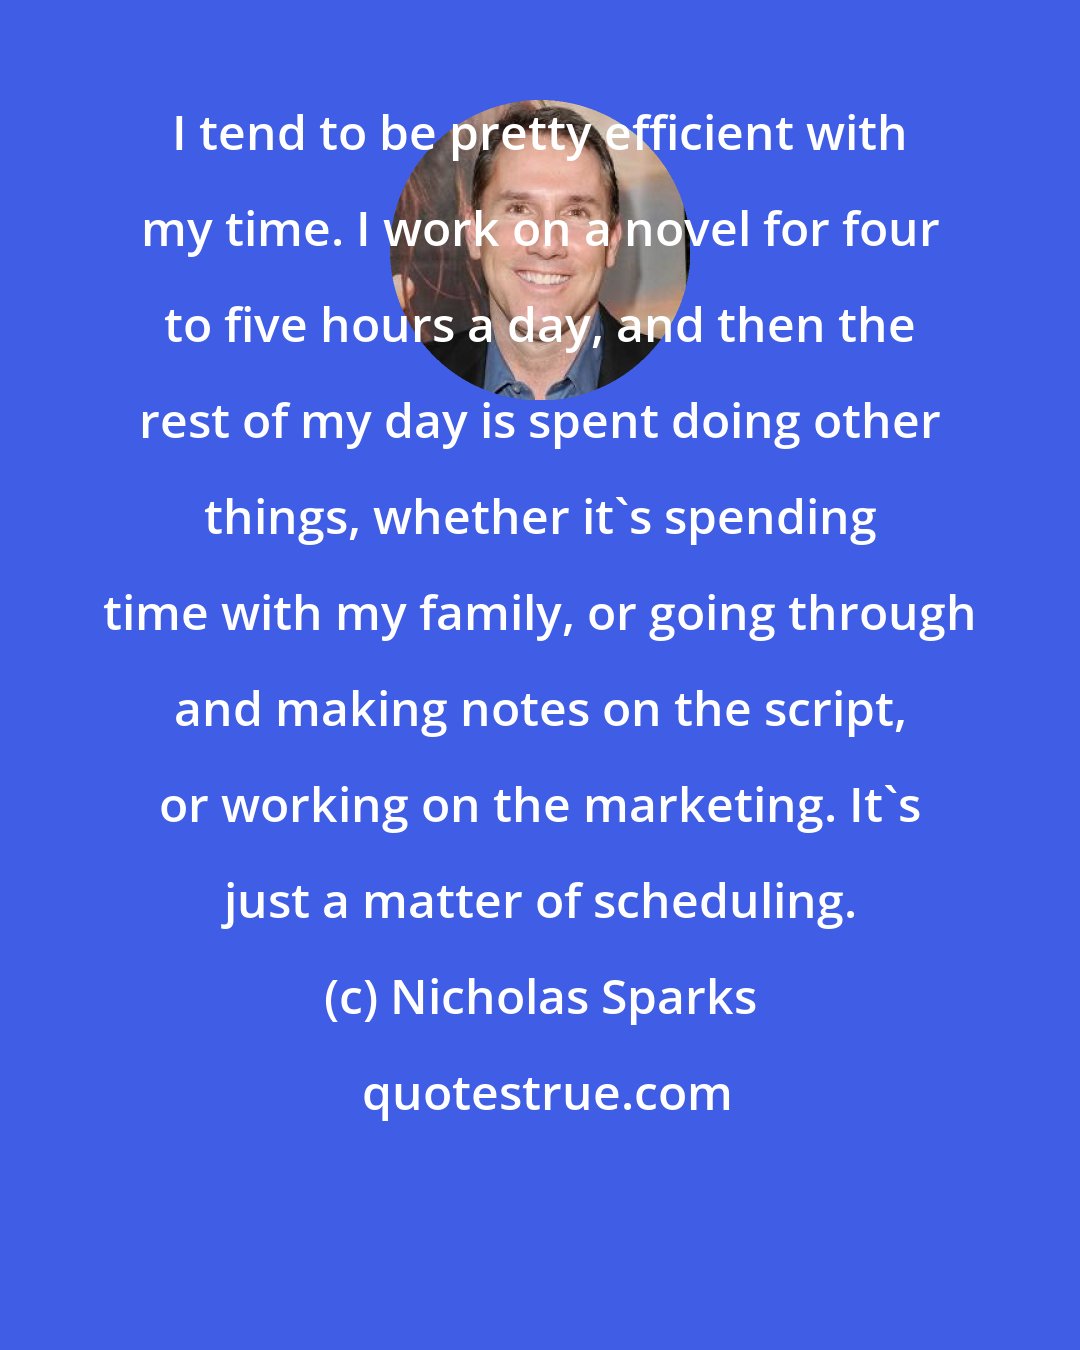 Nicholas Sparks: I tend to be pretty efficient with my time. I work on a novel for four to five hours a day, and then the rest of my day is spent doing other things, whether it's spending time with my family, or going through and making notes on the script, or working on the marketing. It's just a matter of scheduling.